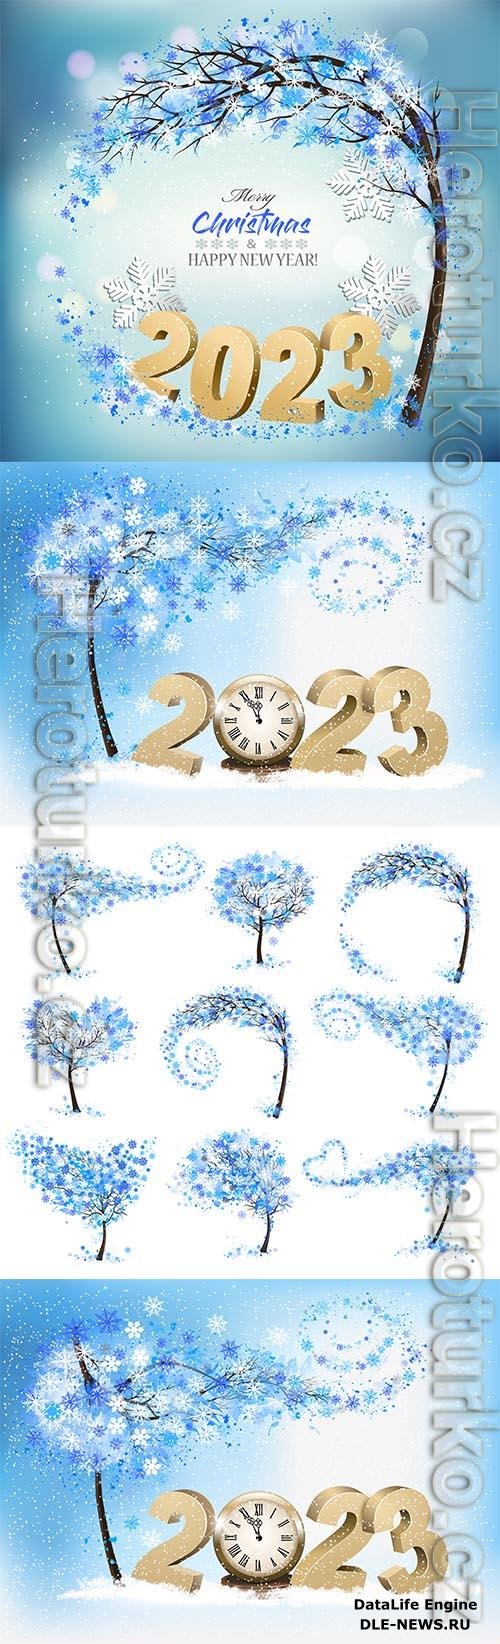 Vector merry christmas and happy new year background with 2023 letters and christmas tree with snowflakes vector